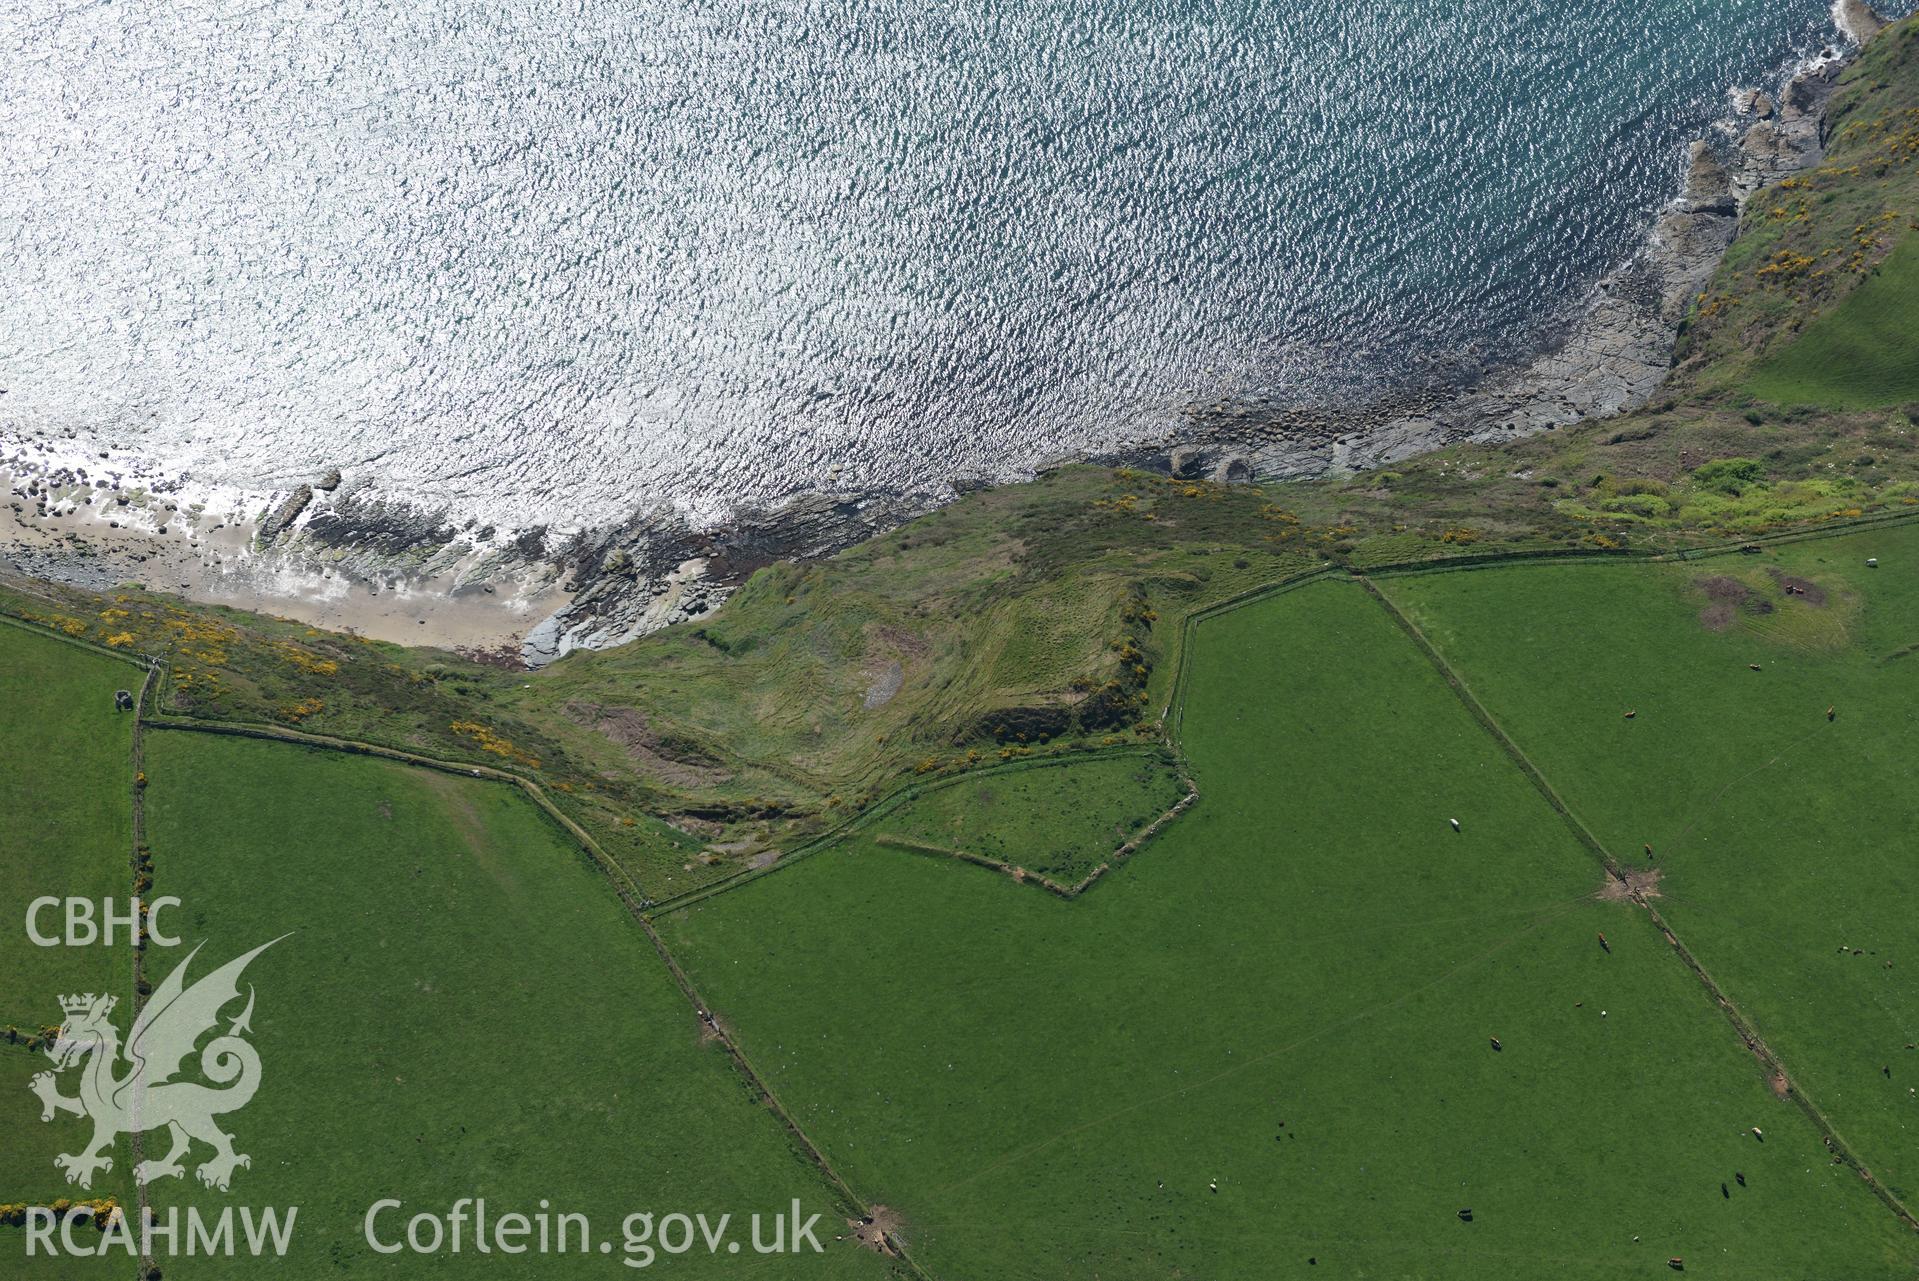 Aerial photography of Pared Mawr camp taken on 3rd May 2017.  Baseline aerial reconnaissance survey for the CHERISH Project. ? Crown: CHERISH PROJECT 2017. Produced with EU funds through the Ireland Wales Co-operation Programme 2014-2020. All material made freely available through the Open Government Licence.